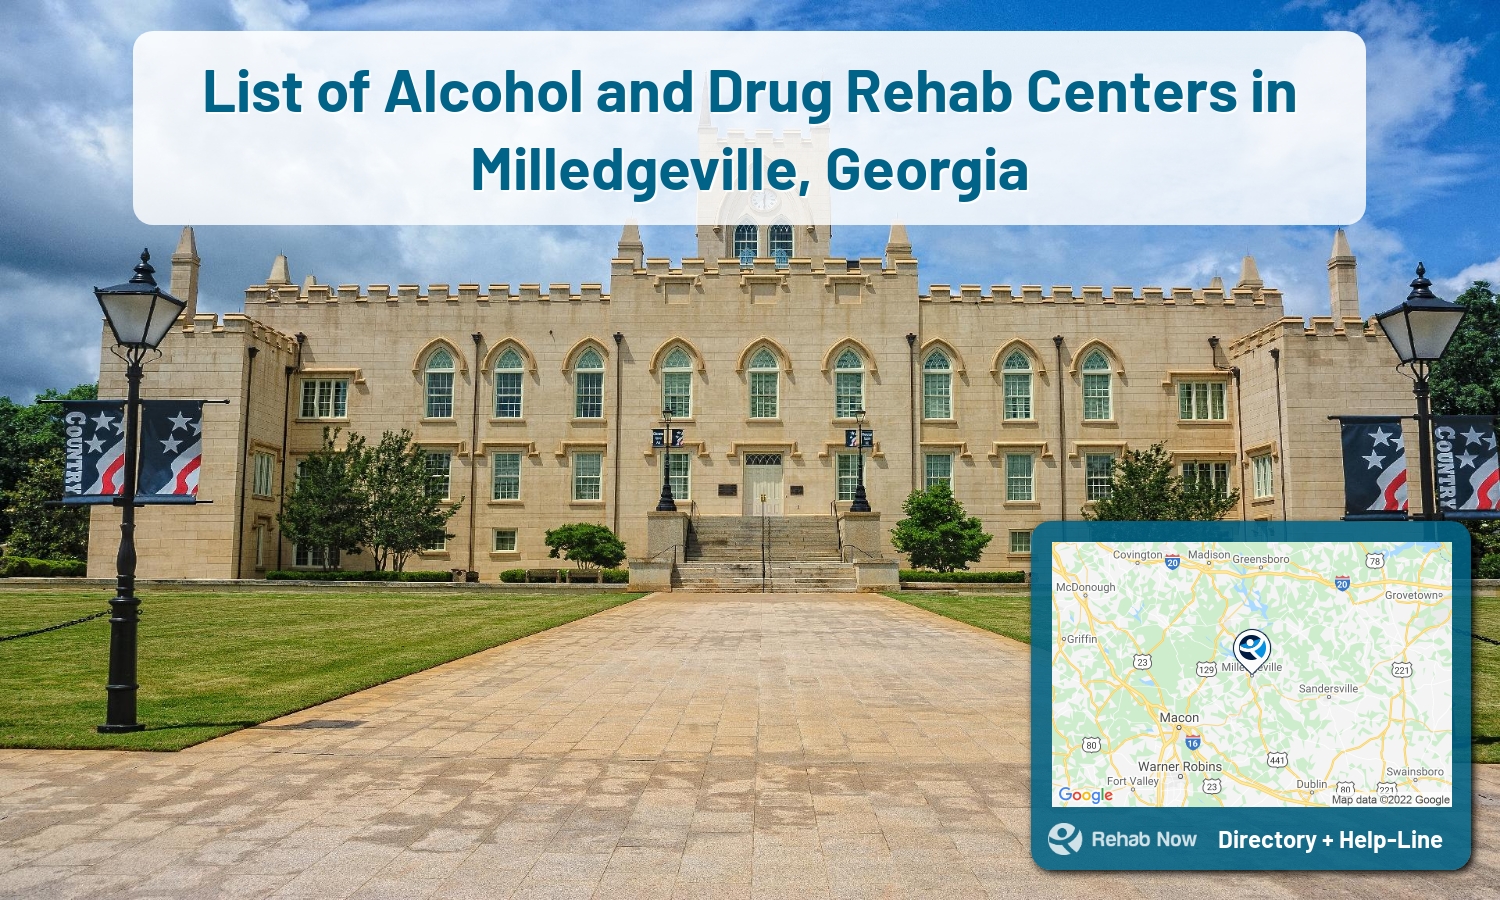 Let our expert counselors help find the best addiction treatment in Milledgeville, Georgia now with a free call to our hotline.